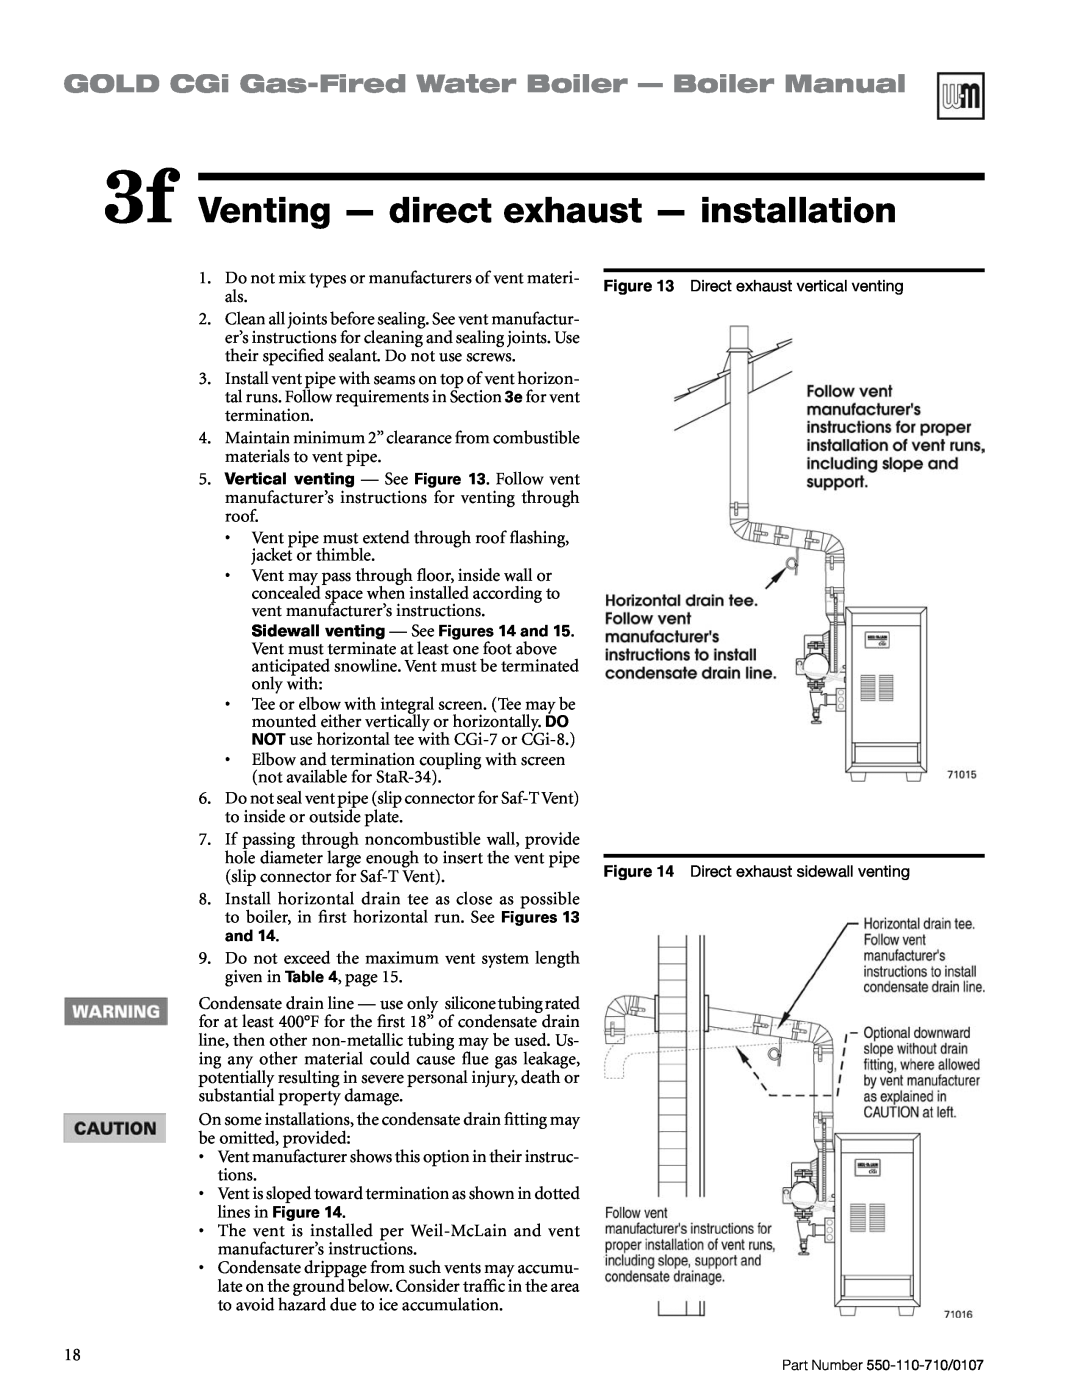 Weil-McLain 550-110-710/0107 3f Venting - direct exhaust - installation, GOLD CGi Gas-FiredWater Boiler — Boiler Manual 